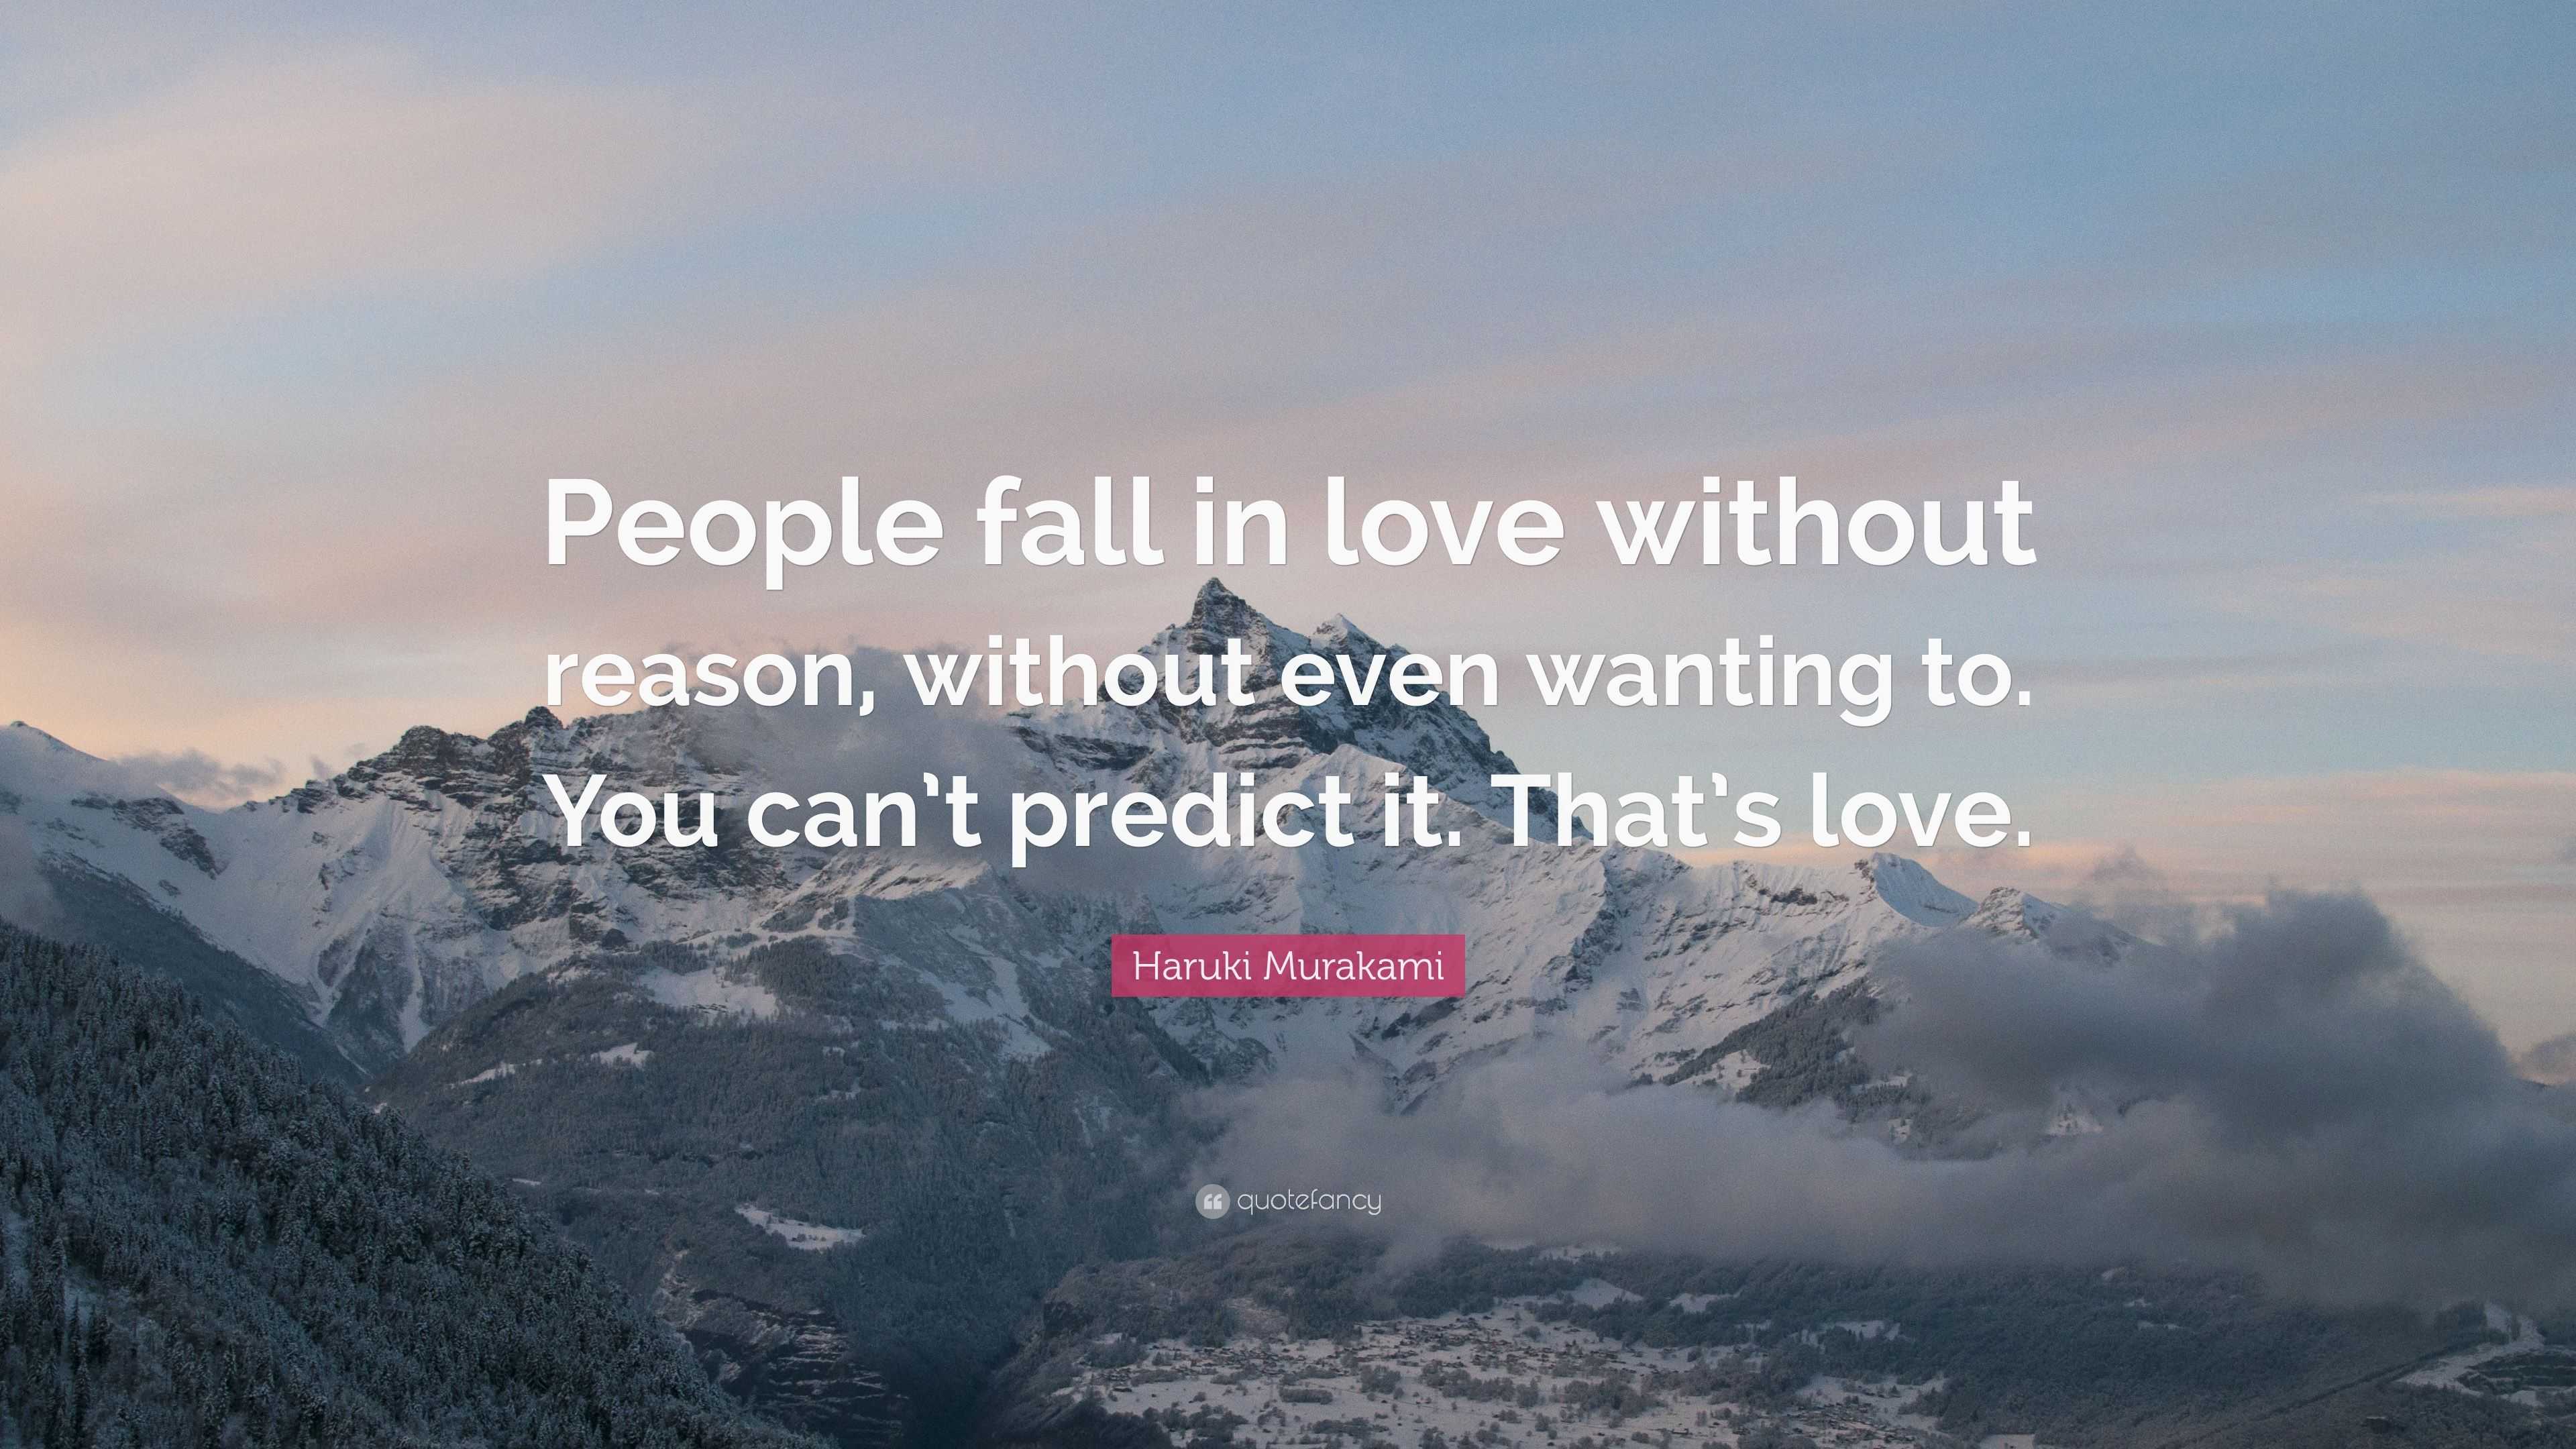 Haruki Murakami Quote “People fall in love without reason without even wanting to